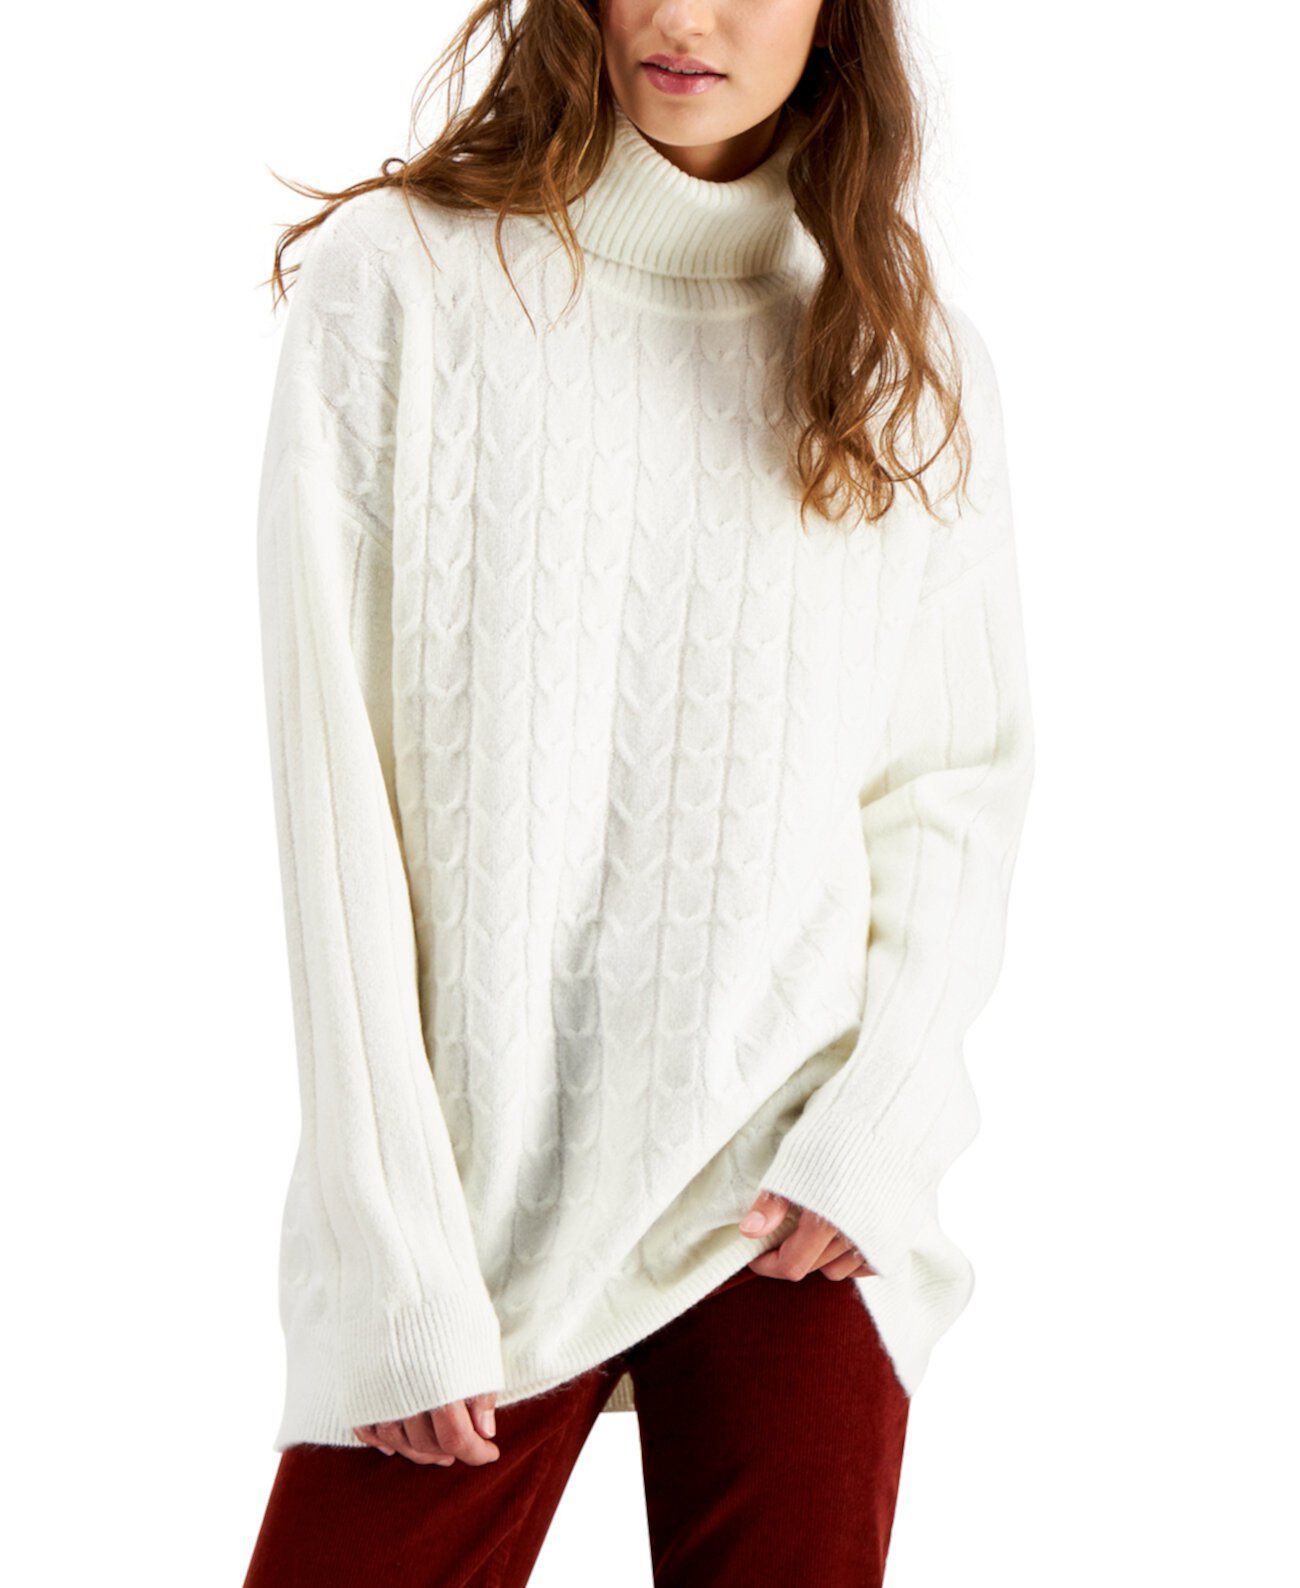 Juniors' Cable-Knit Turtleneck Tunic Sweater Hooked Up by IOT